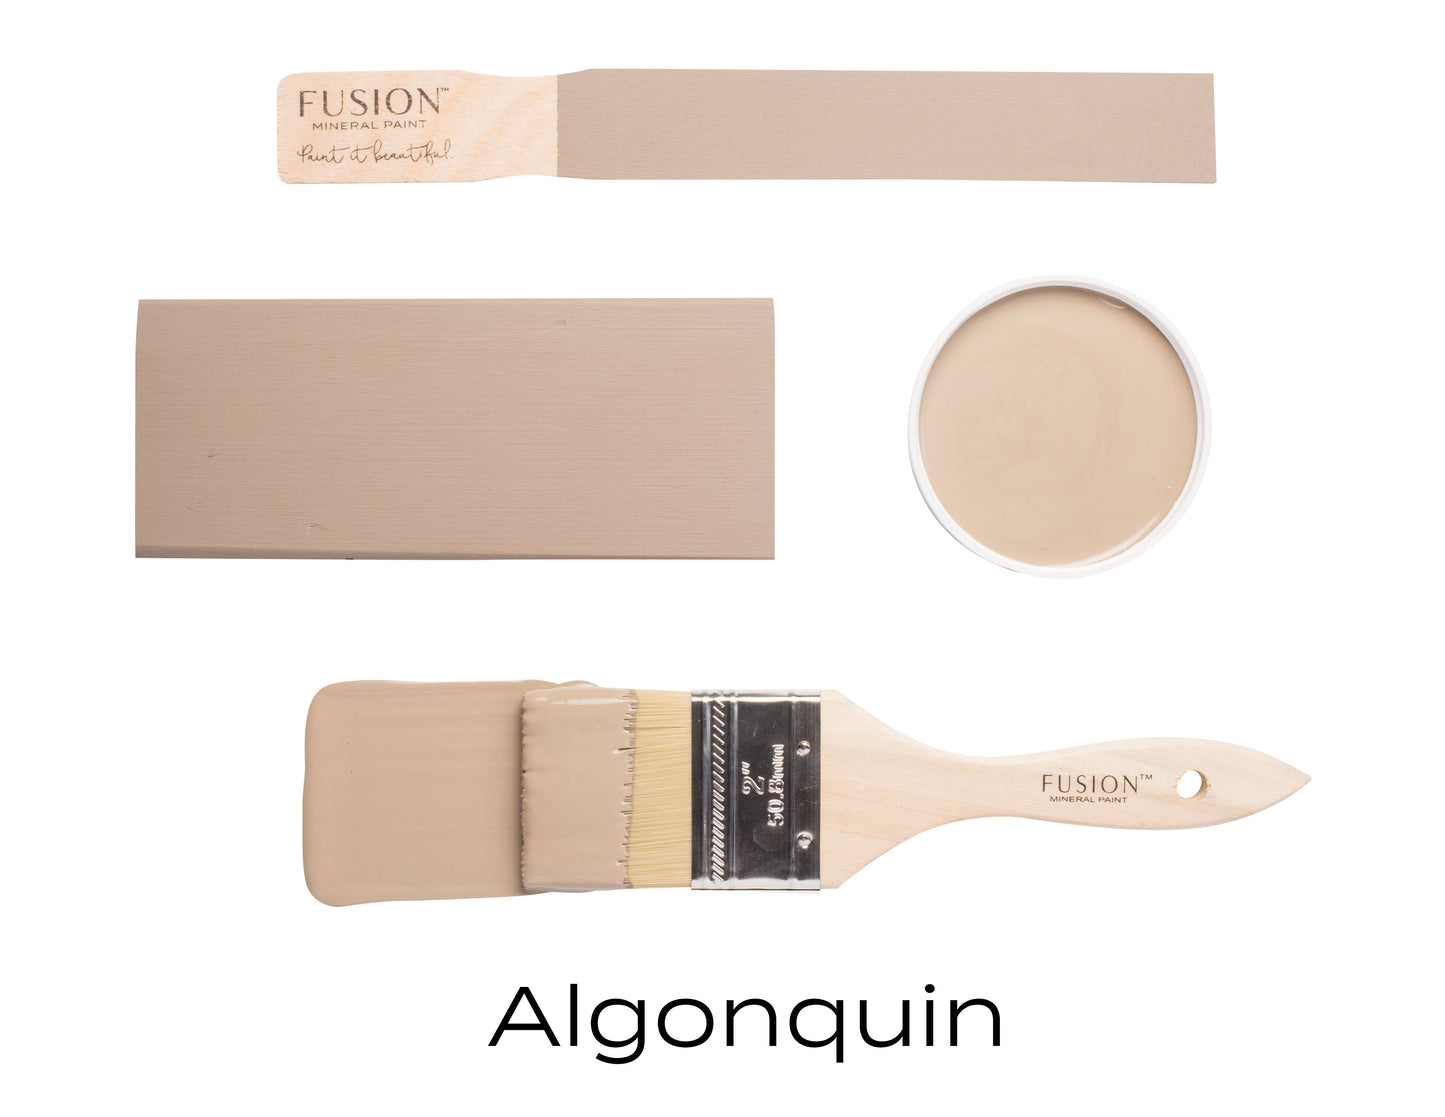 Algonquin by Fusion